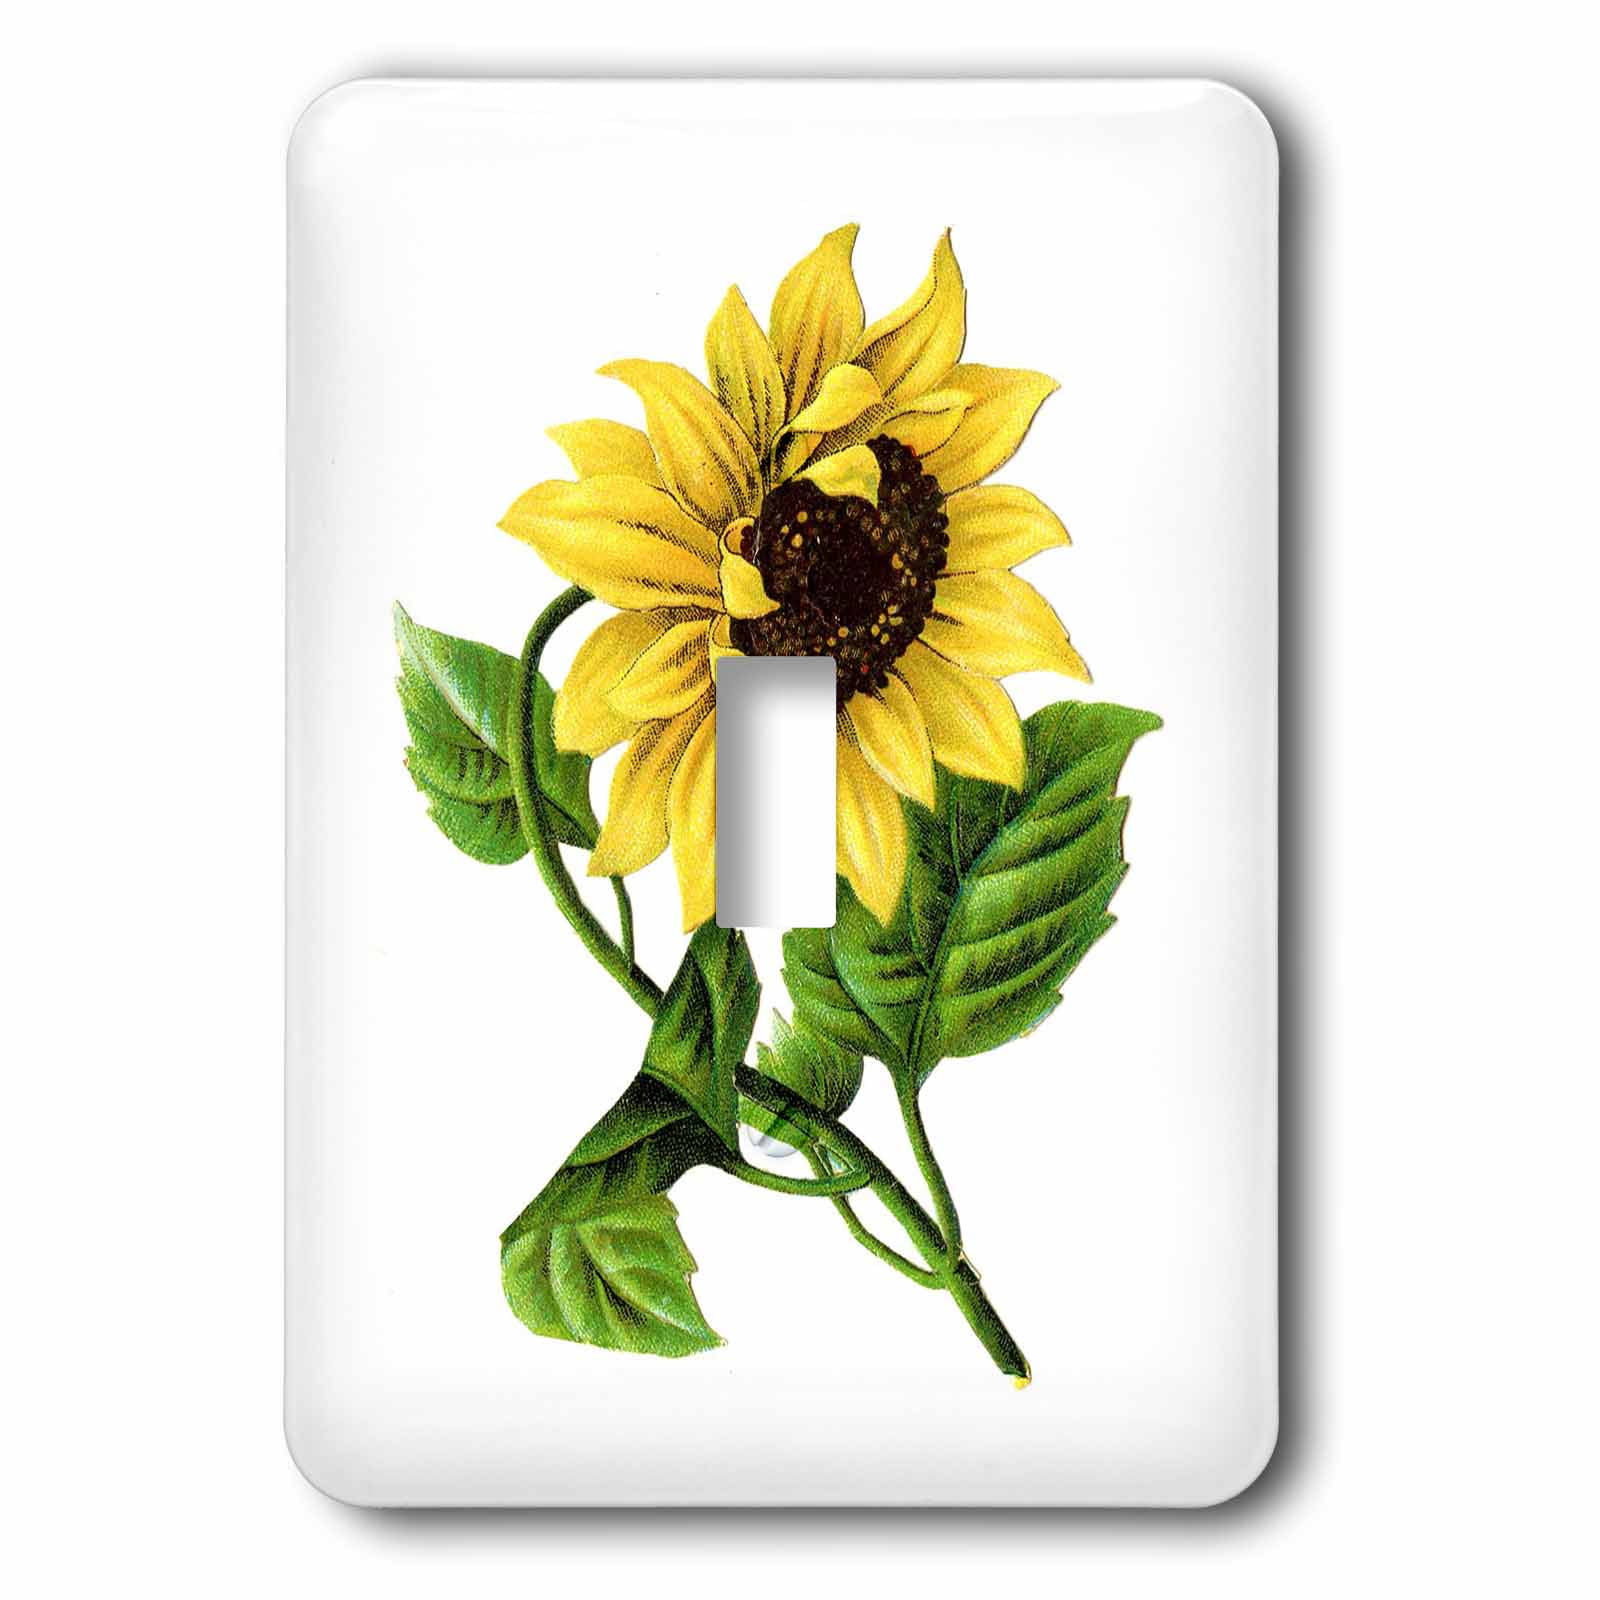 3dRose lsp_44694_1 Yellow Sunflower In Summer Toggle switch